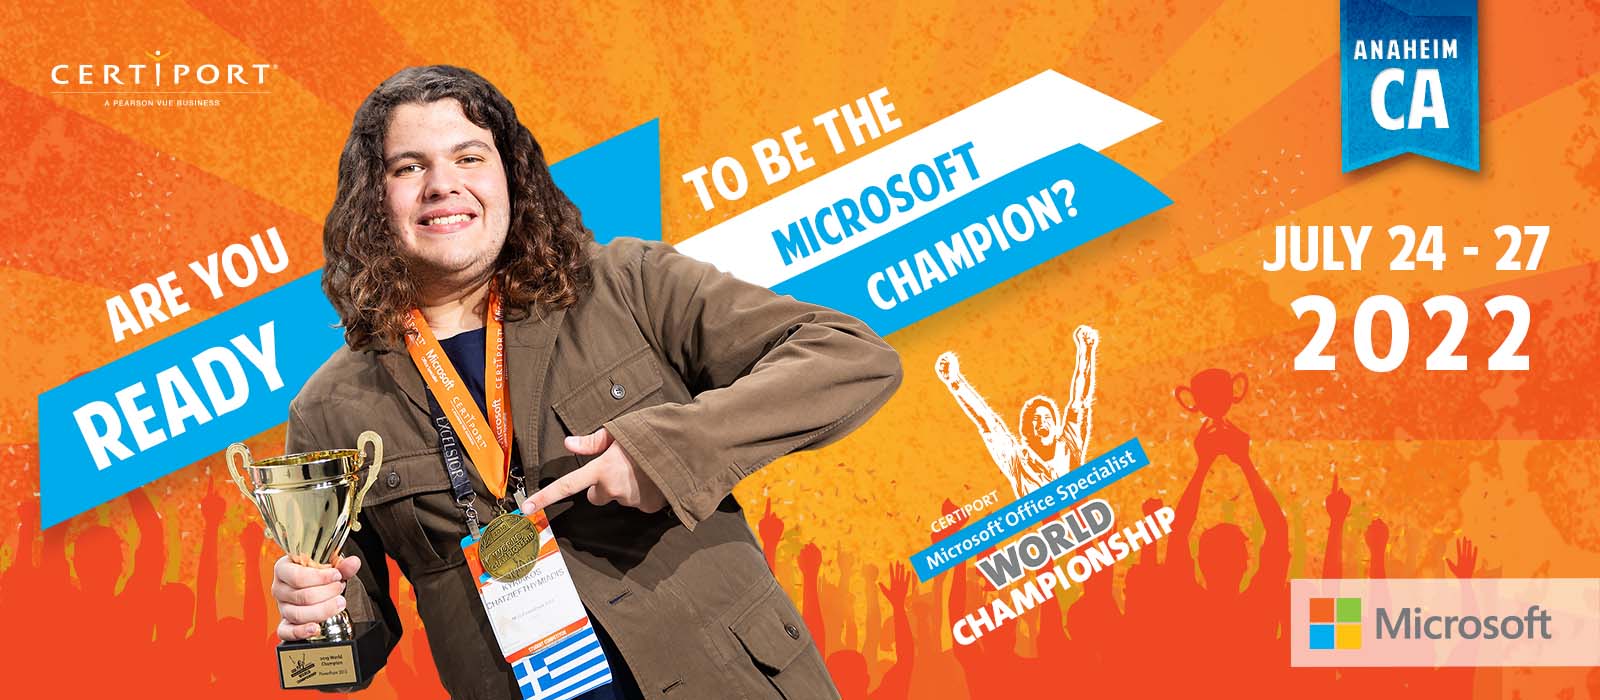 Certiport Microsoft Office Specialist World Championship: Are you ready to be the Microsoft champion? Anaheim, CA; July 24 - 27, 2022